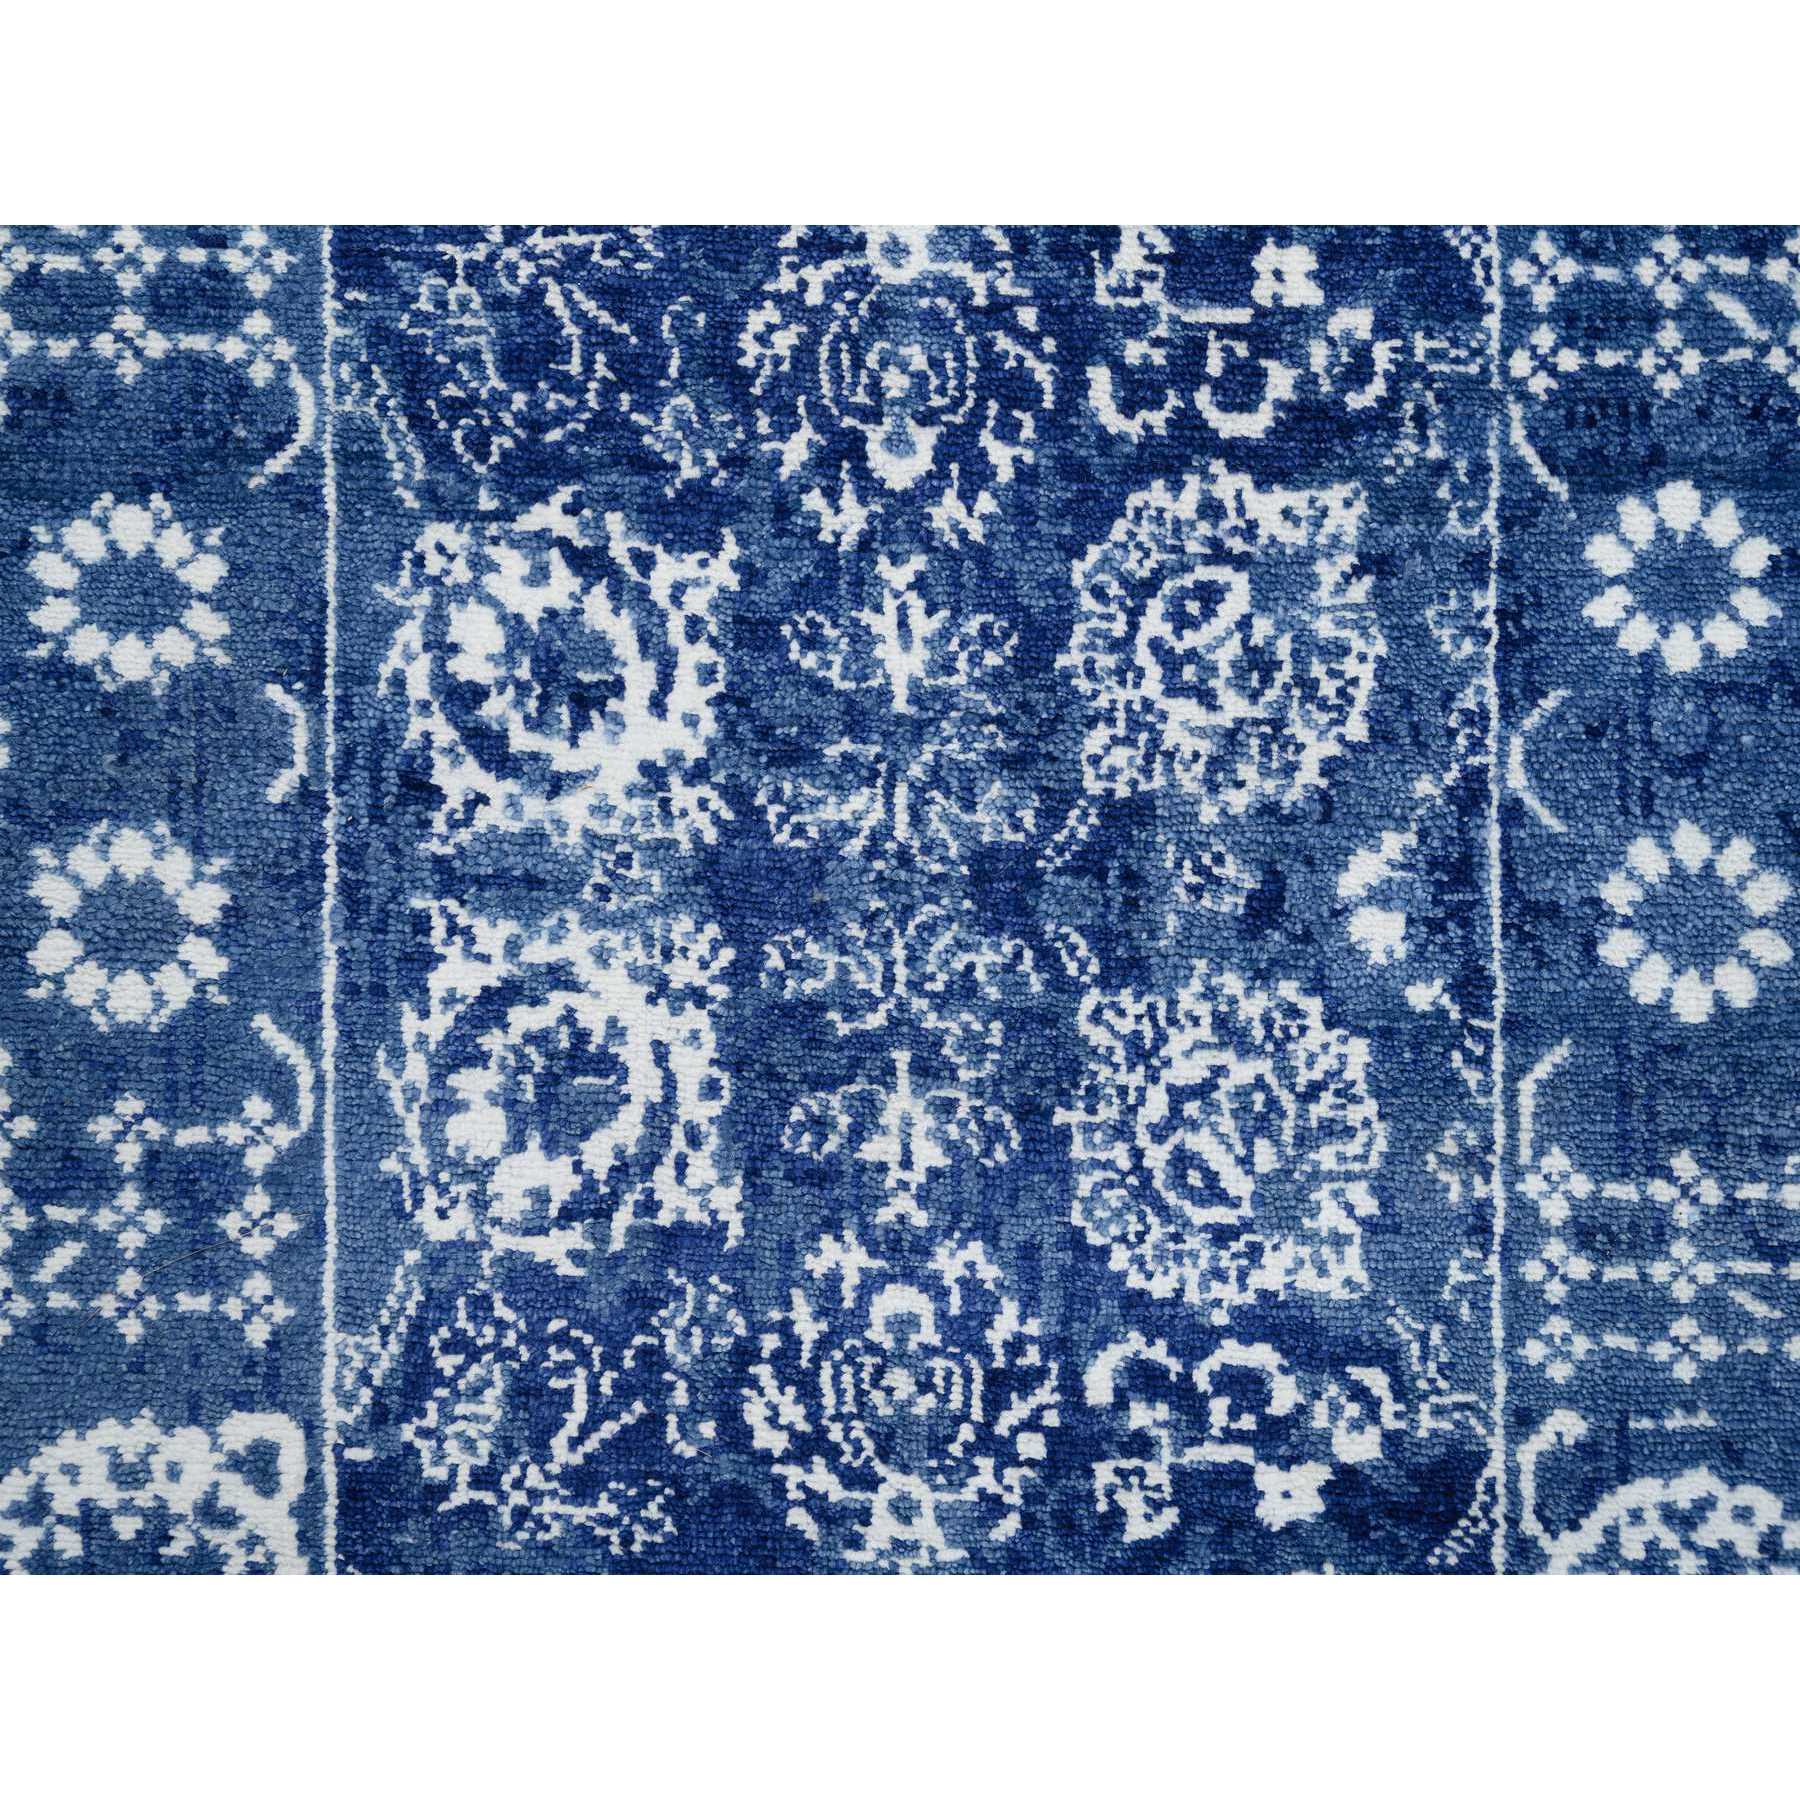 2'7"x12' Denim Blue, Tabriz with All Over Motifs Tone on Tone, Wool and Silk Hand Woven, Runner Oriental Rug 